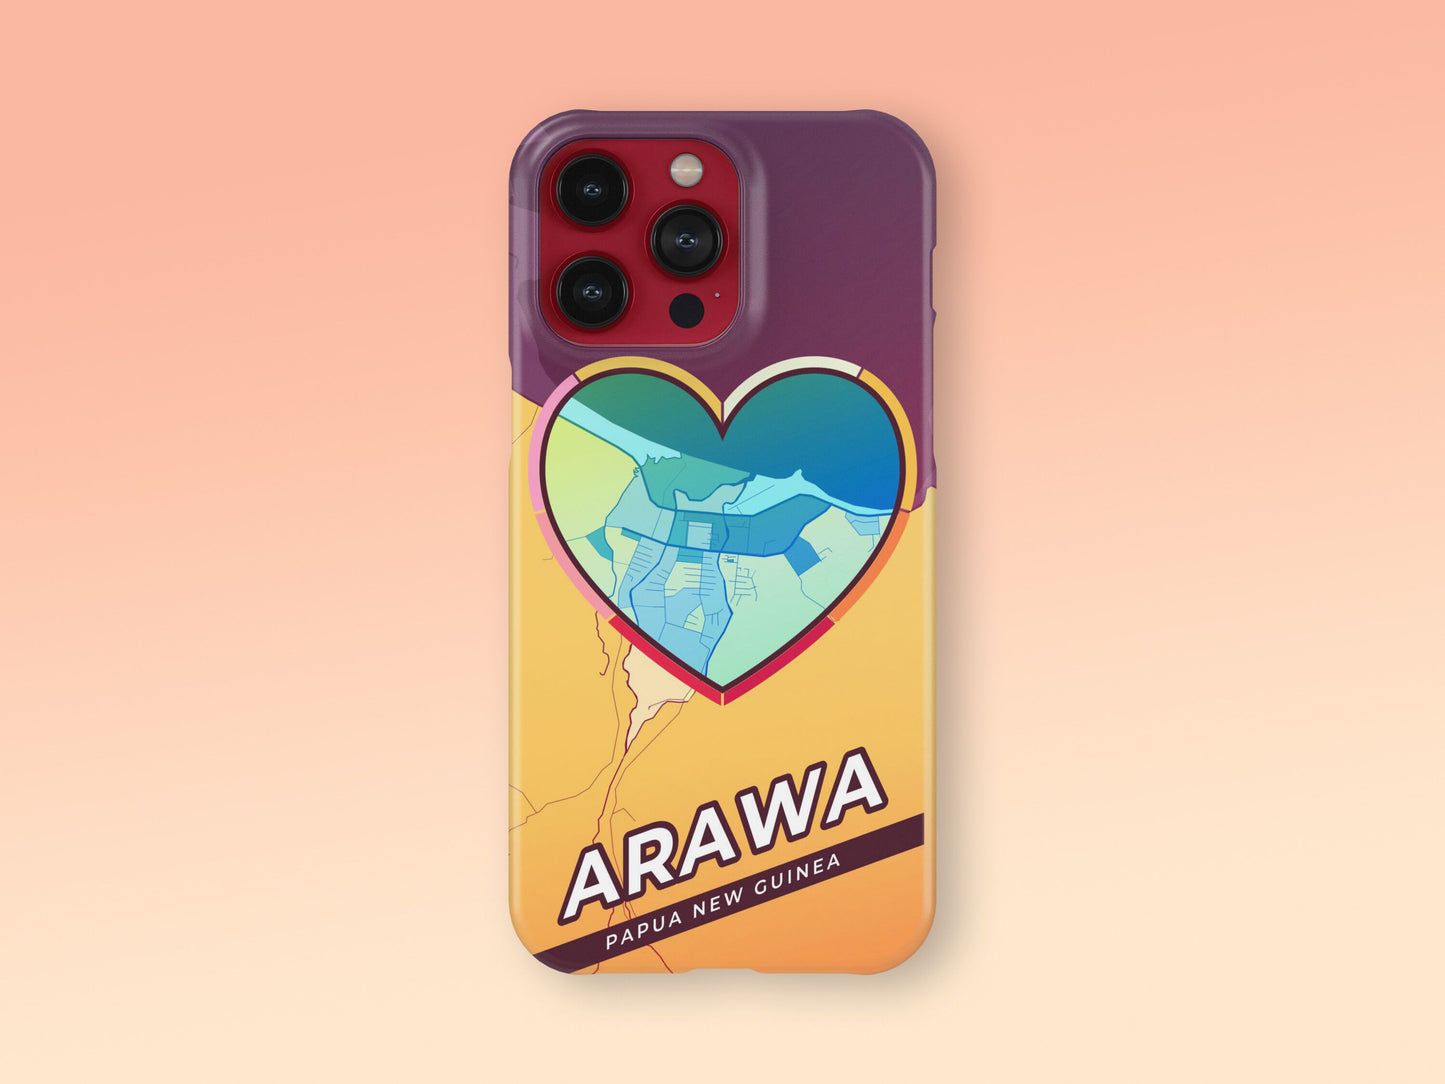 Arawa Papua New Guinea slim phone case with colorful icon. Birthday, wedding or housewarming gift. Couple match cases. 2